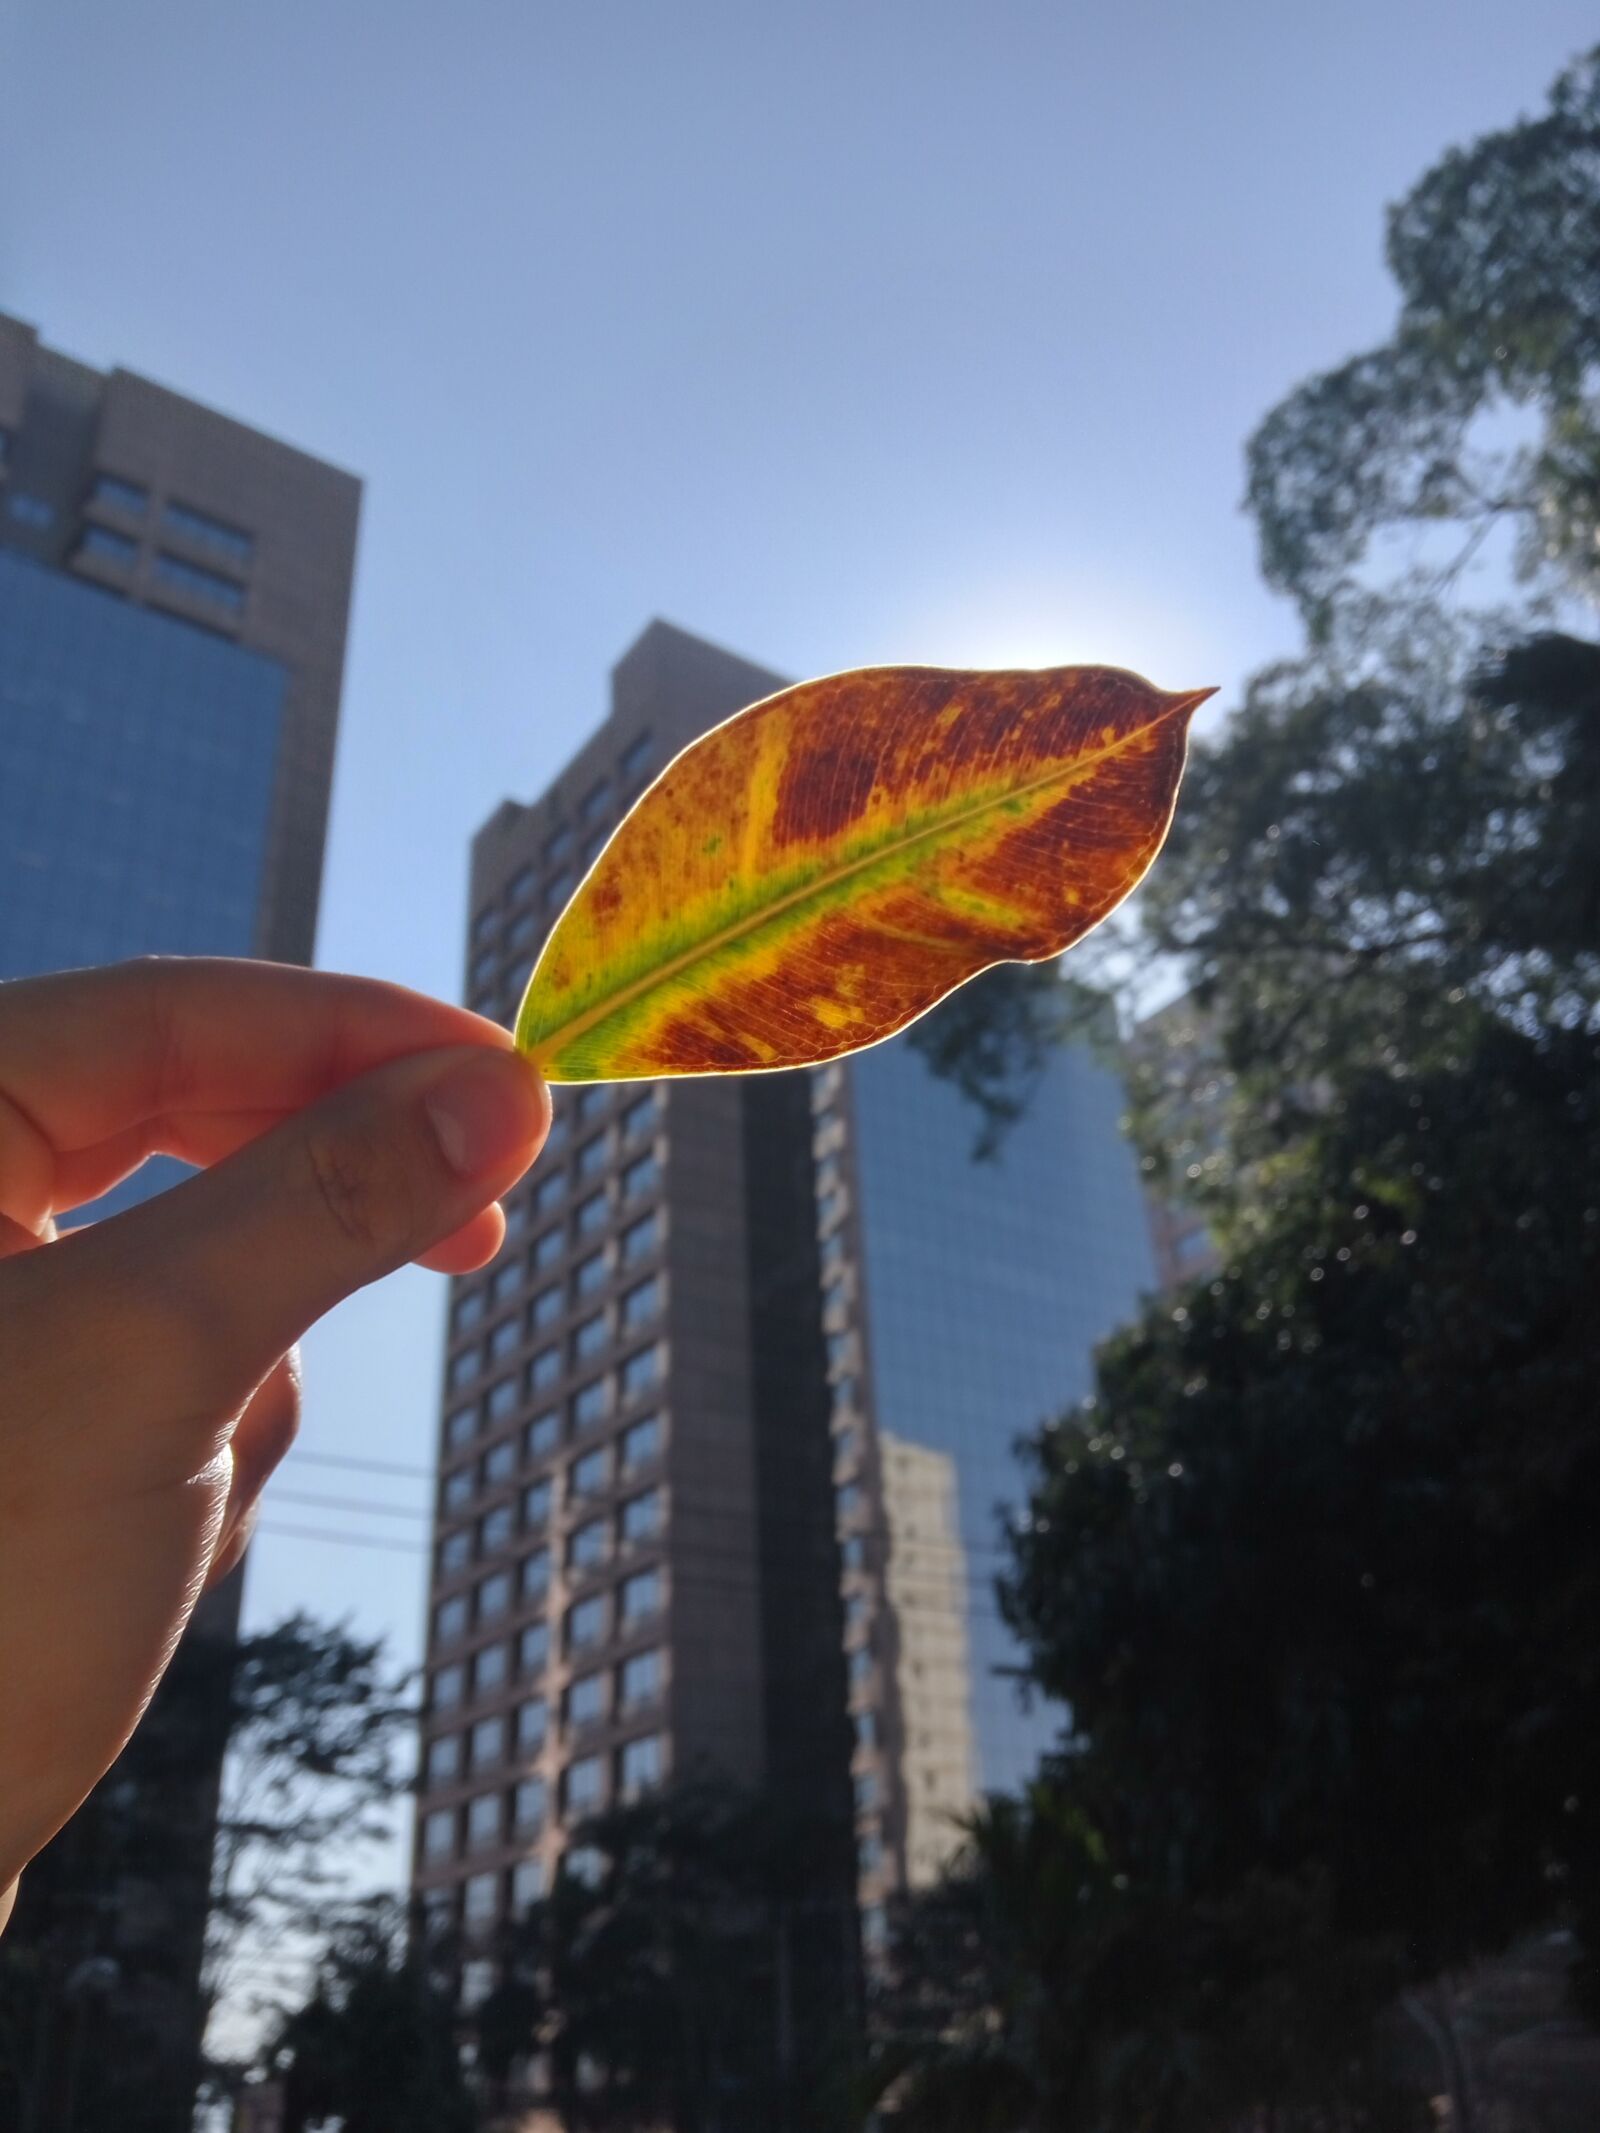 Xiaomi Redmi Note 3 sample photo. Leaf, nature, buildings photography